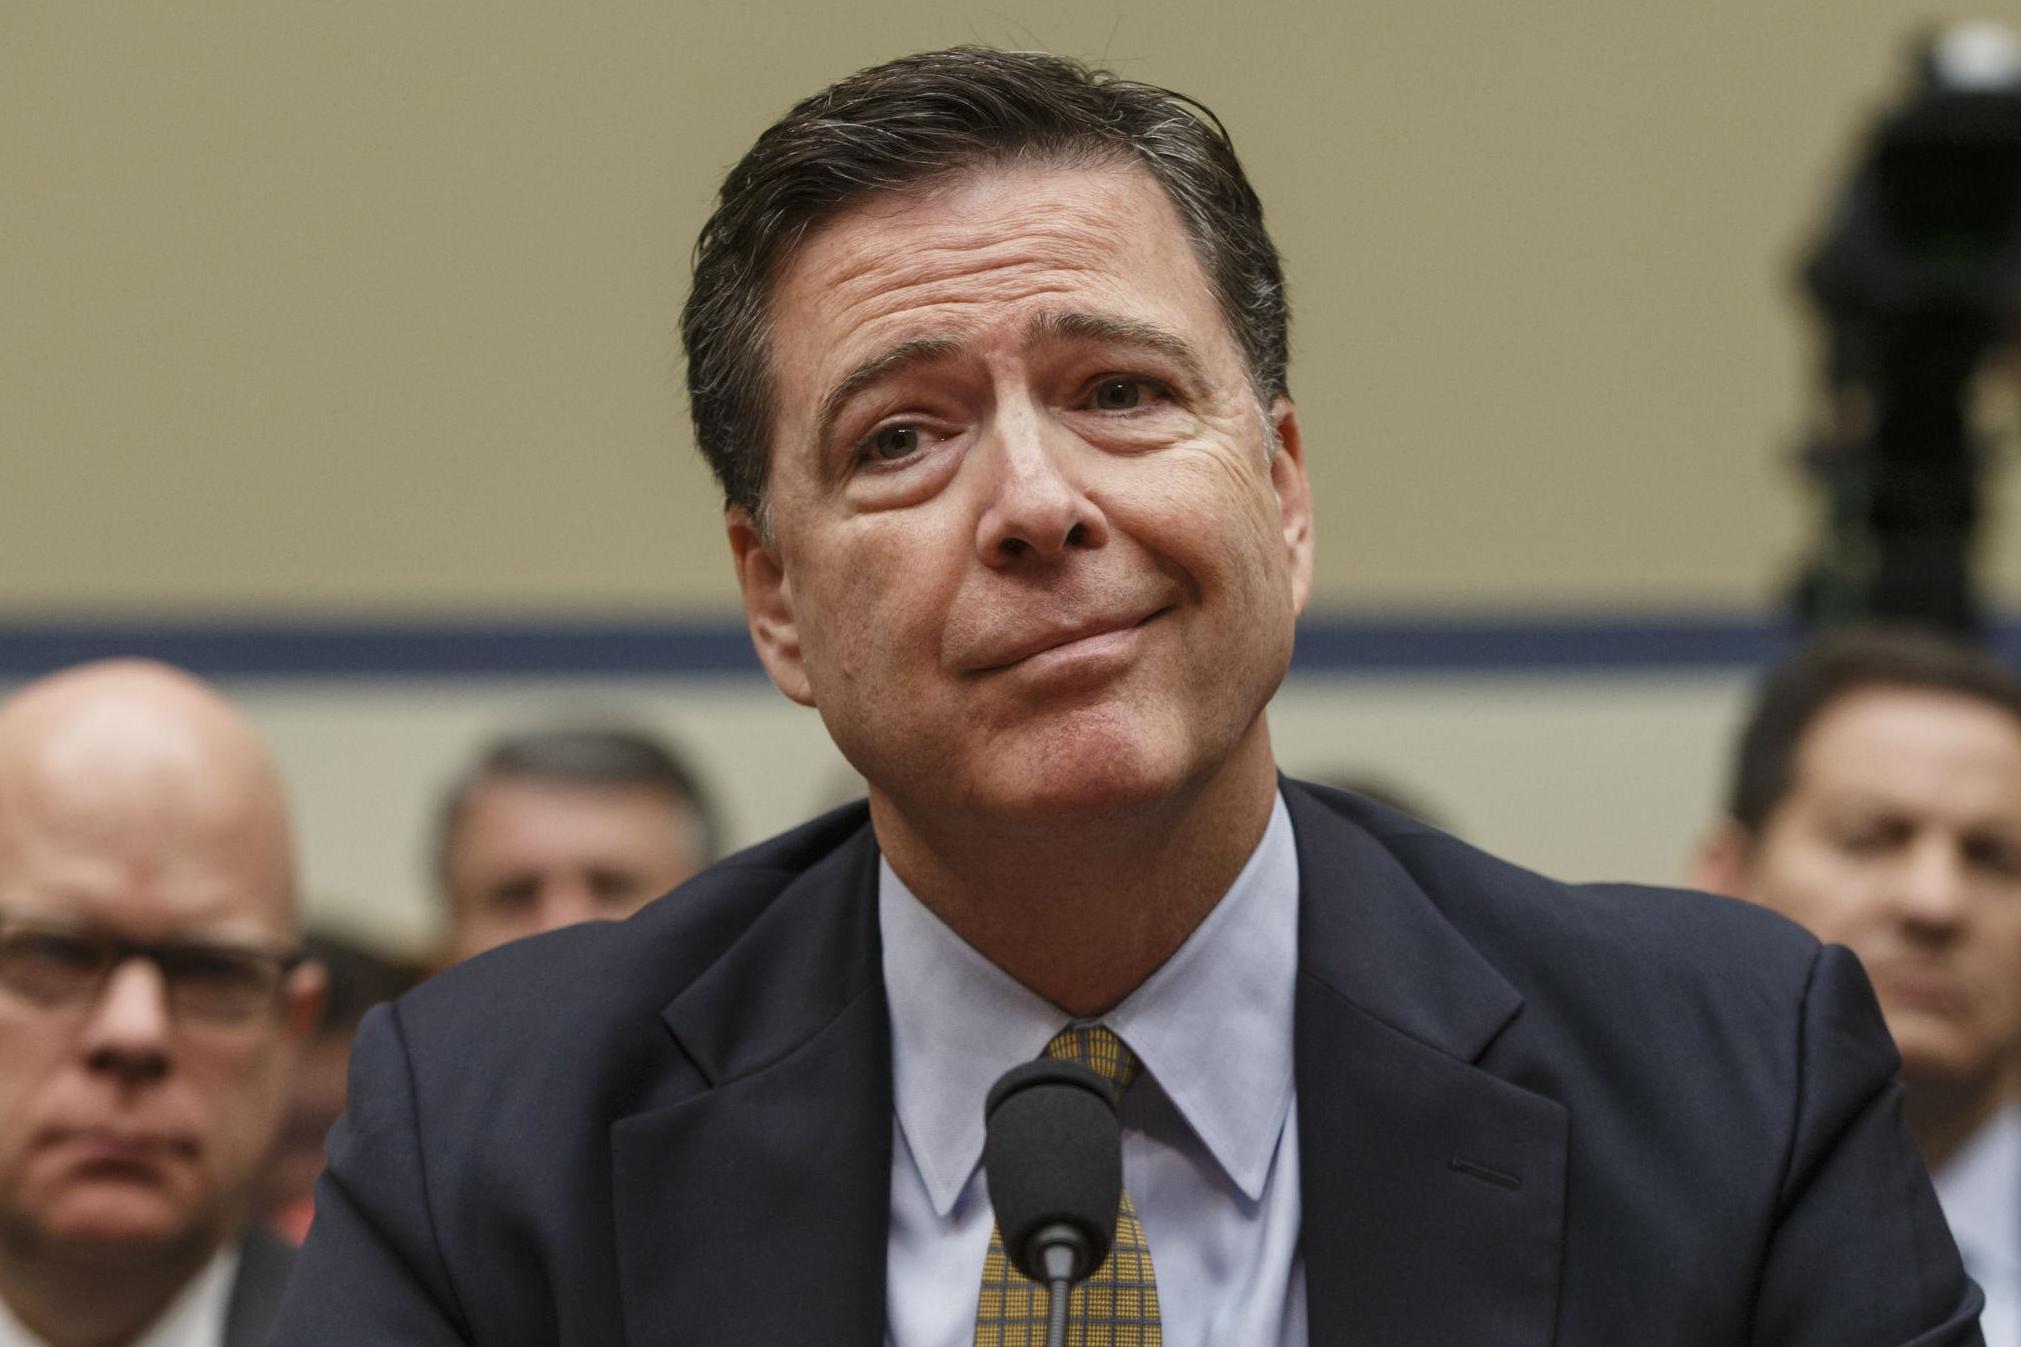 The FBI director said in a letter Sunday the reopened investigation did not find any criminal wrongdoing